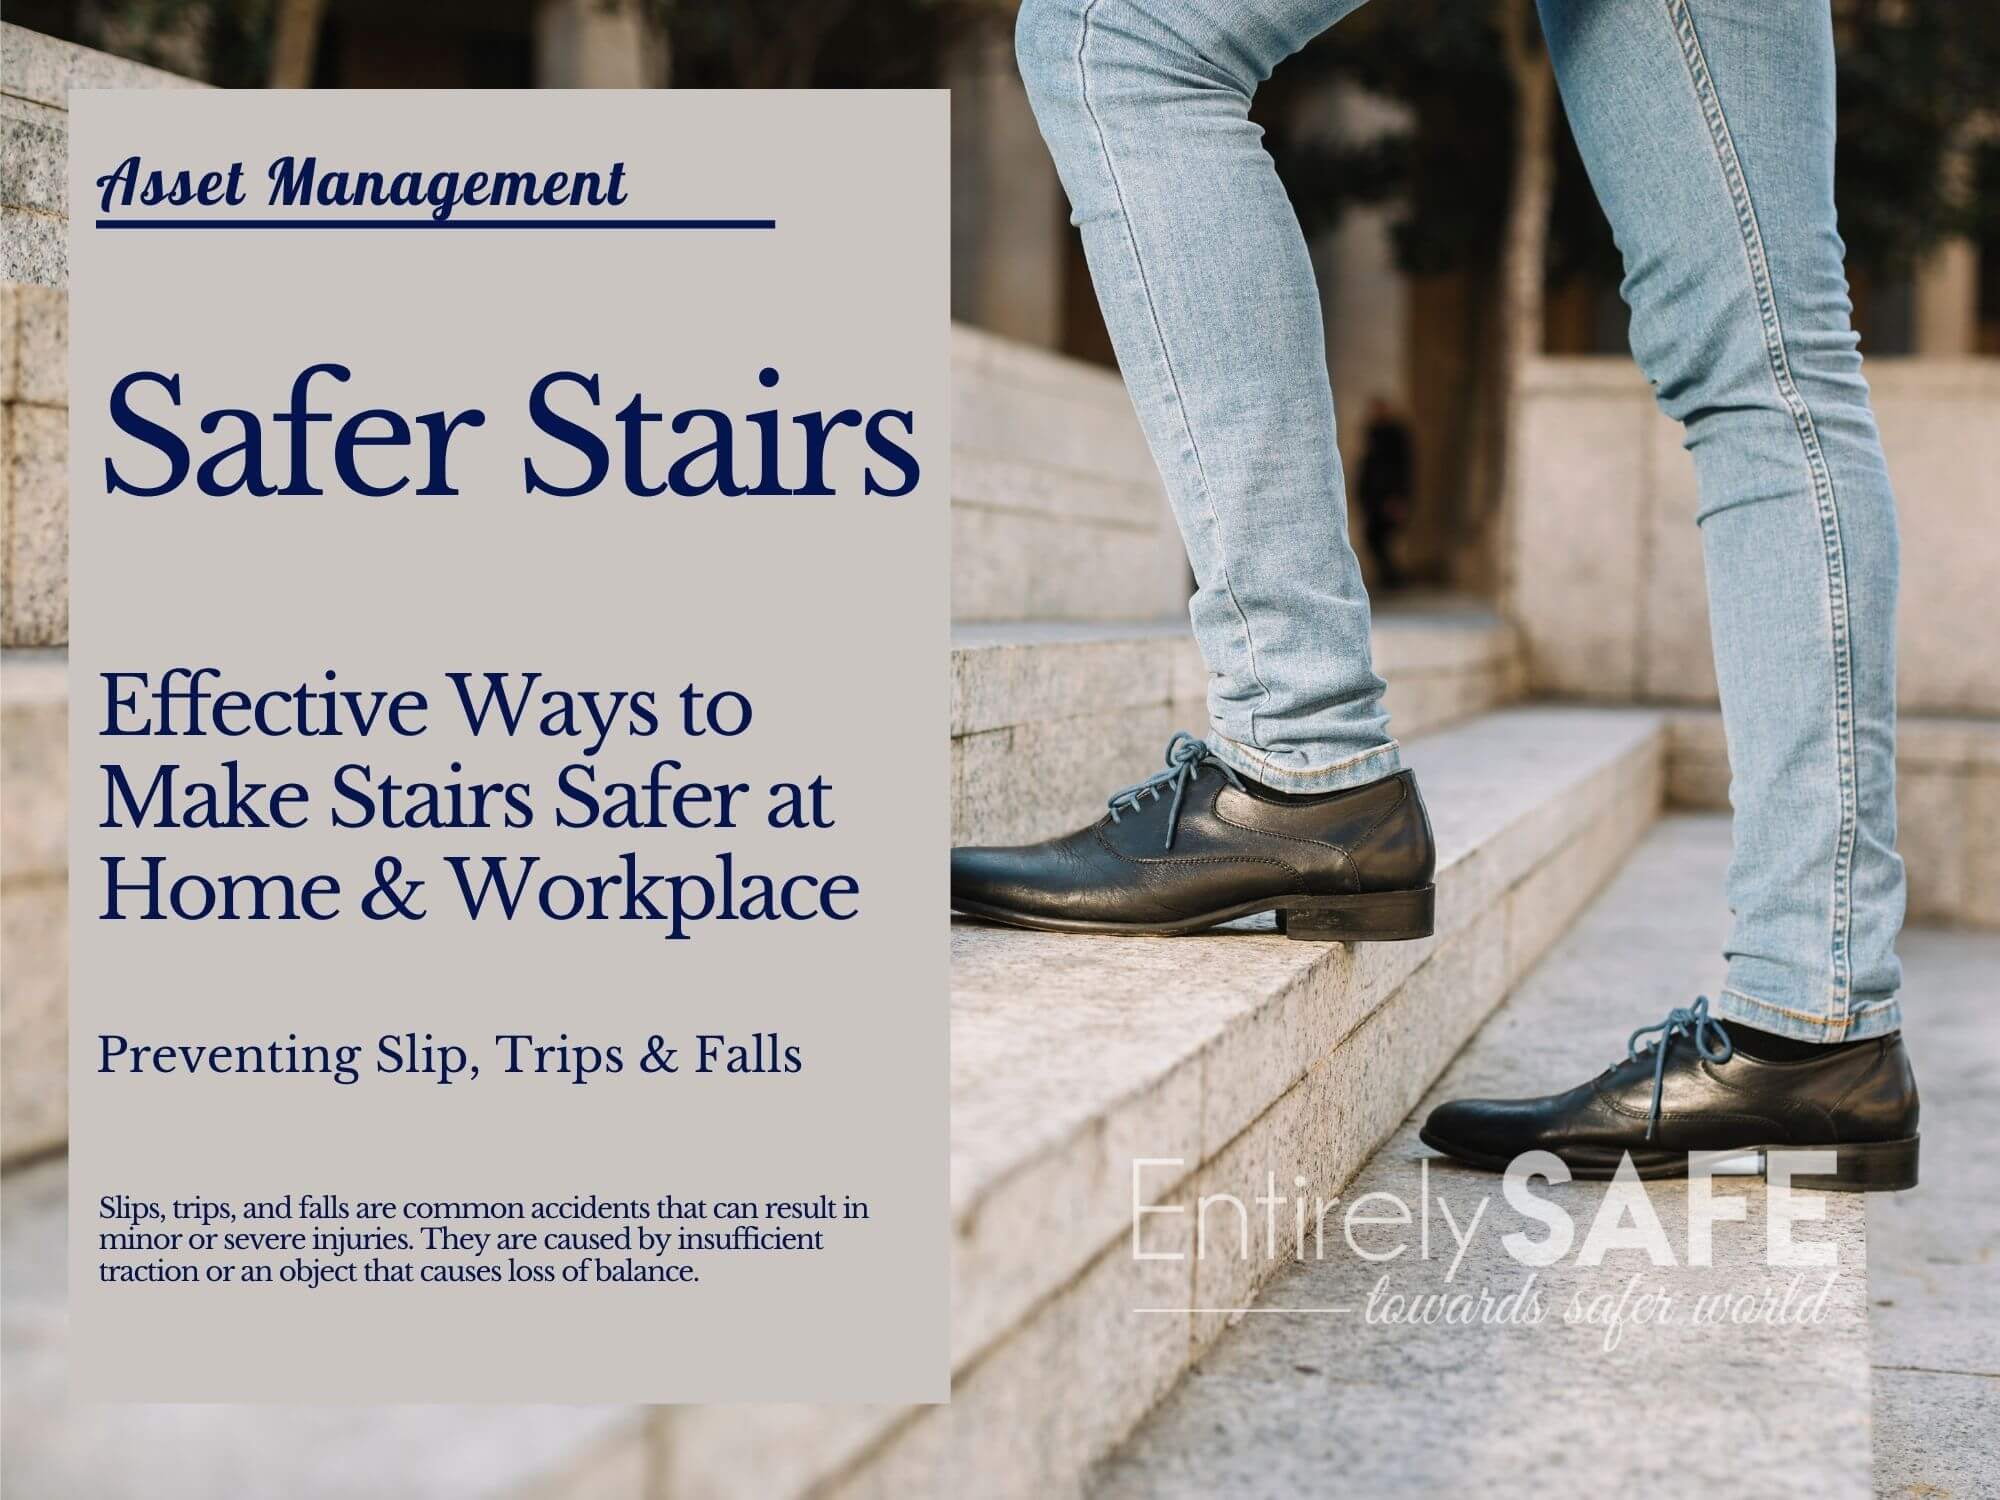 Effective Ways to Make Stairs Safer at Home and Workplace